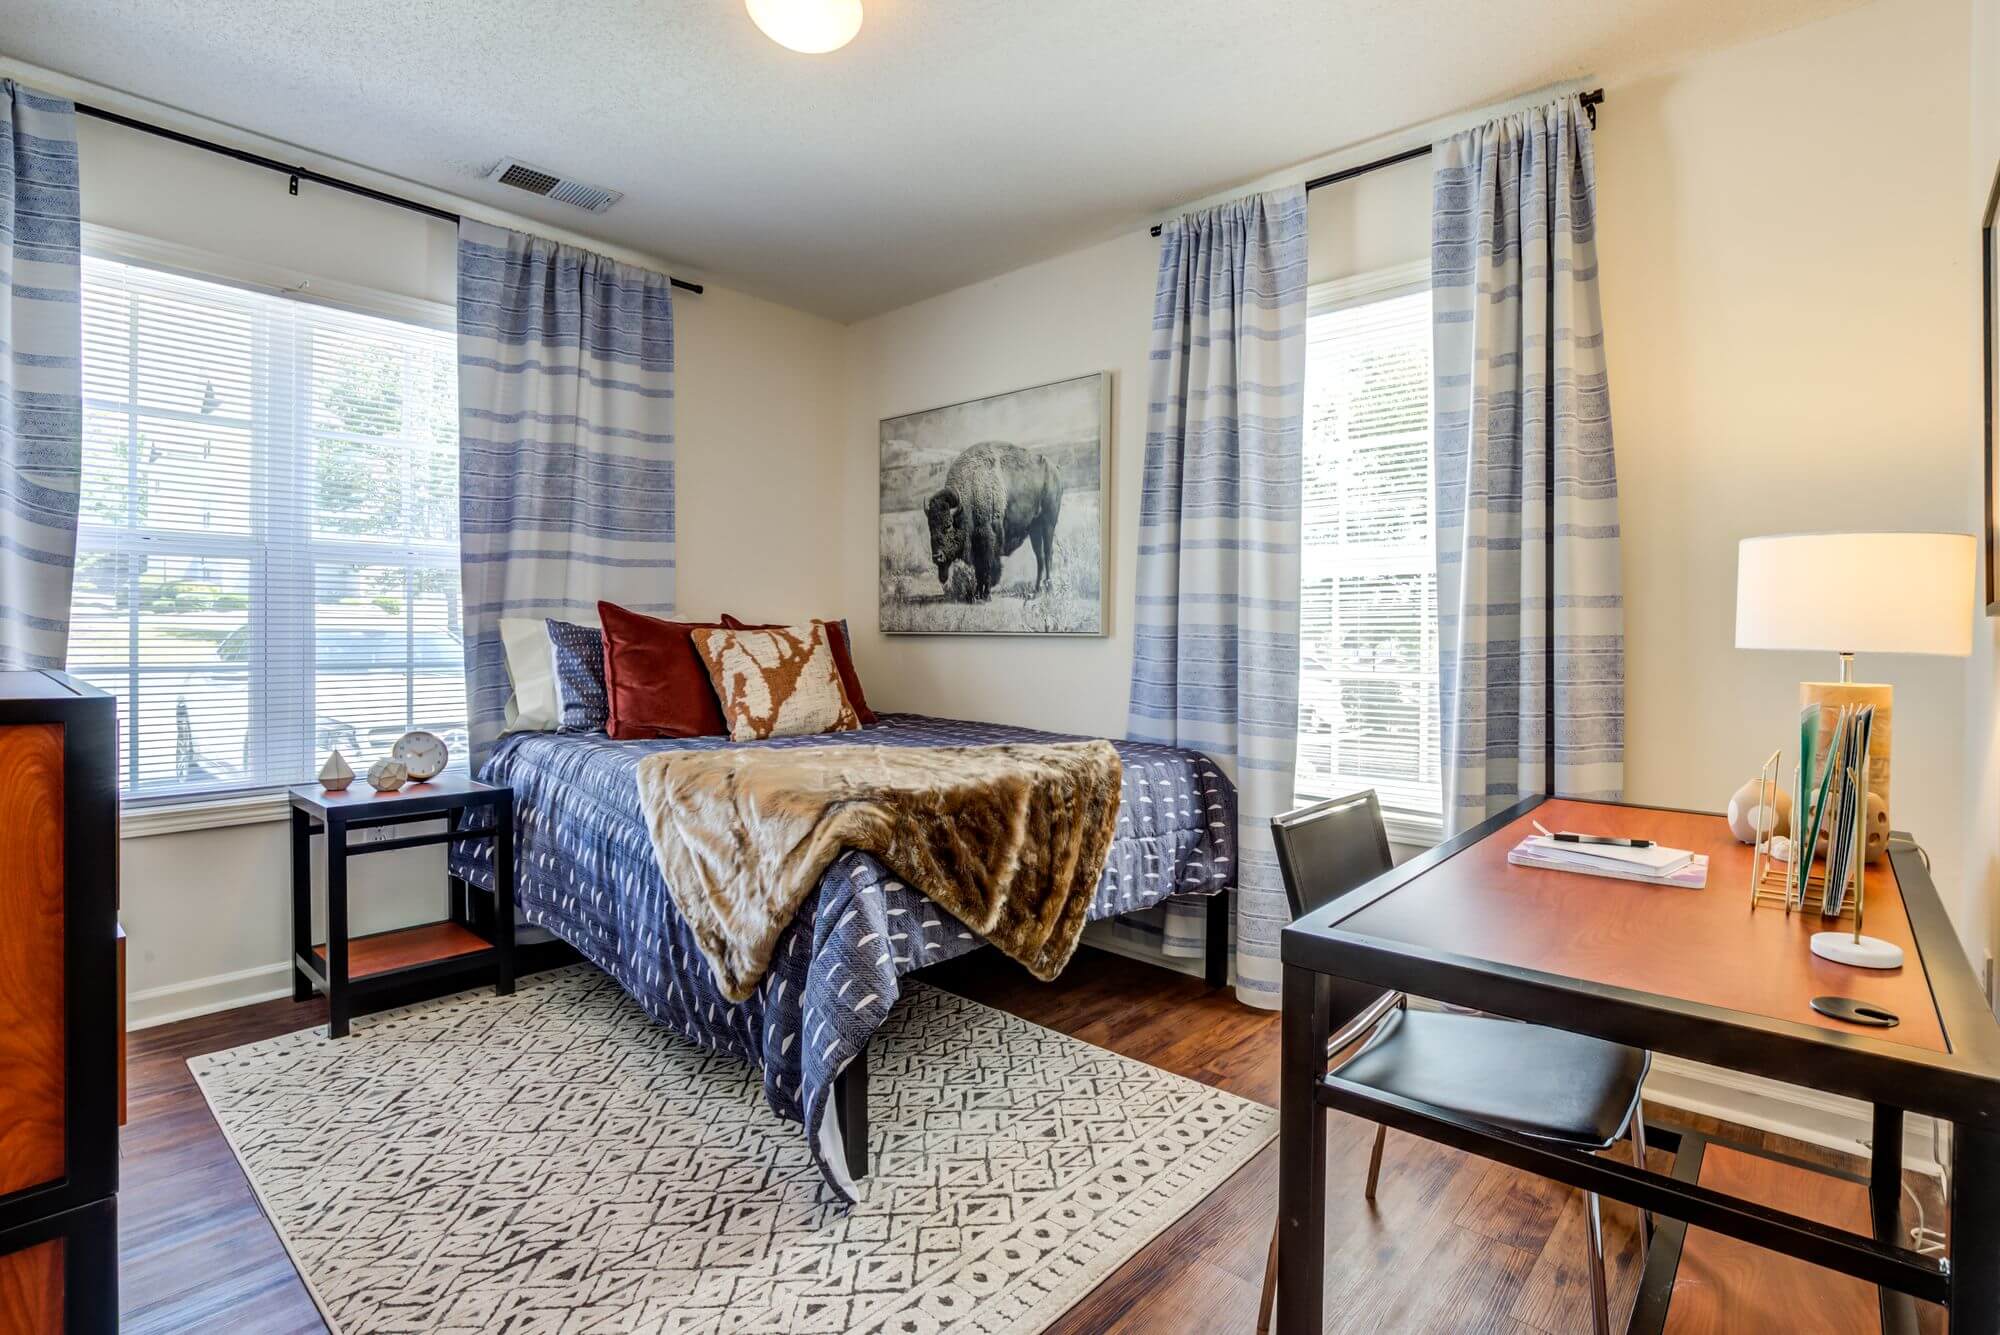 university village at clemson off campus apartments and townhomes near clemson university private bedrooms furnished options available